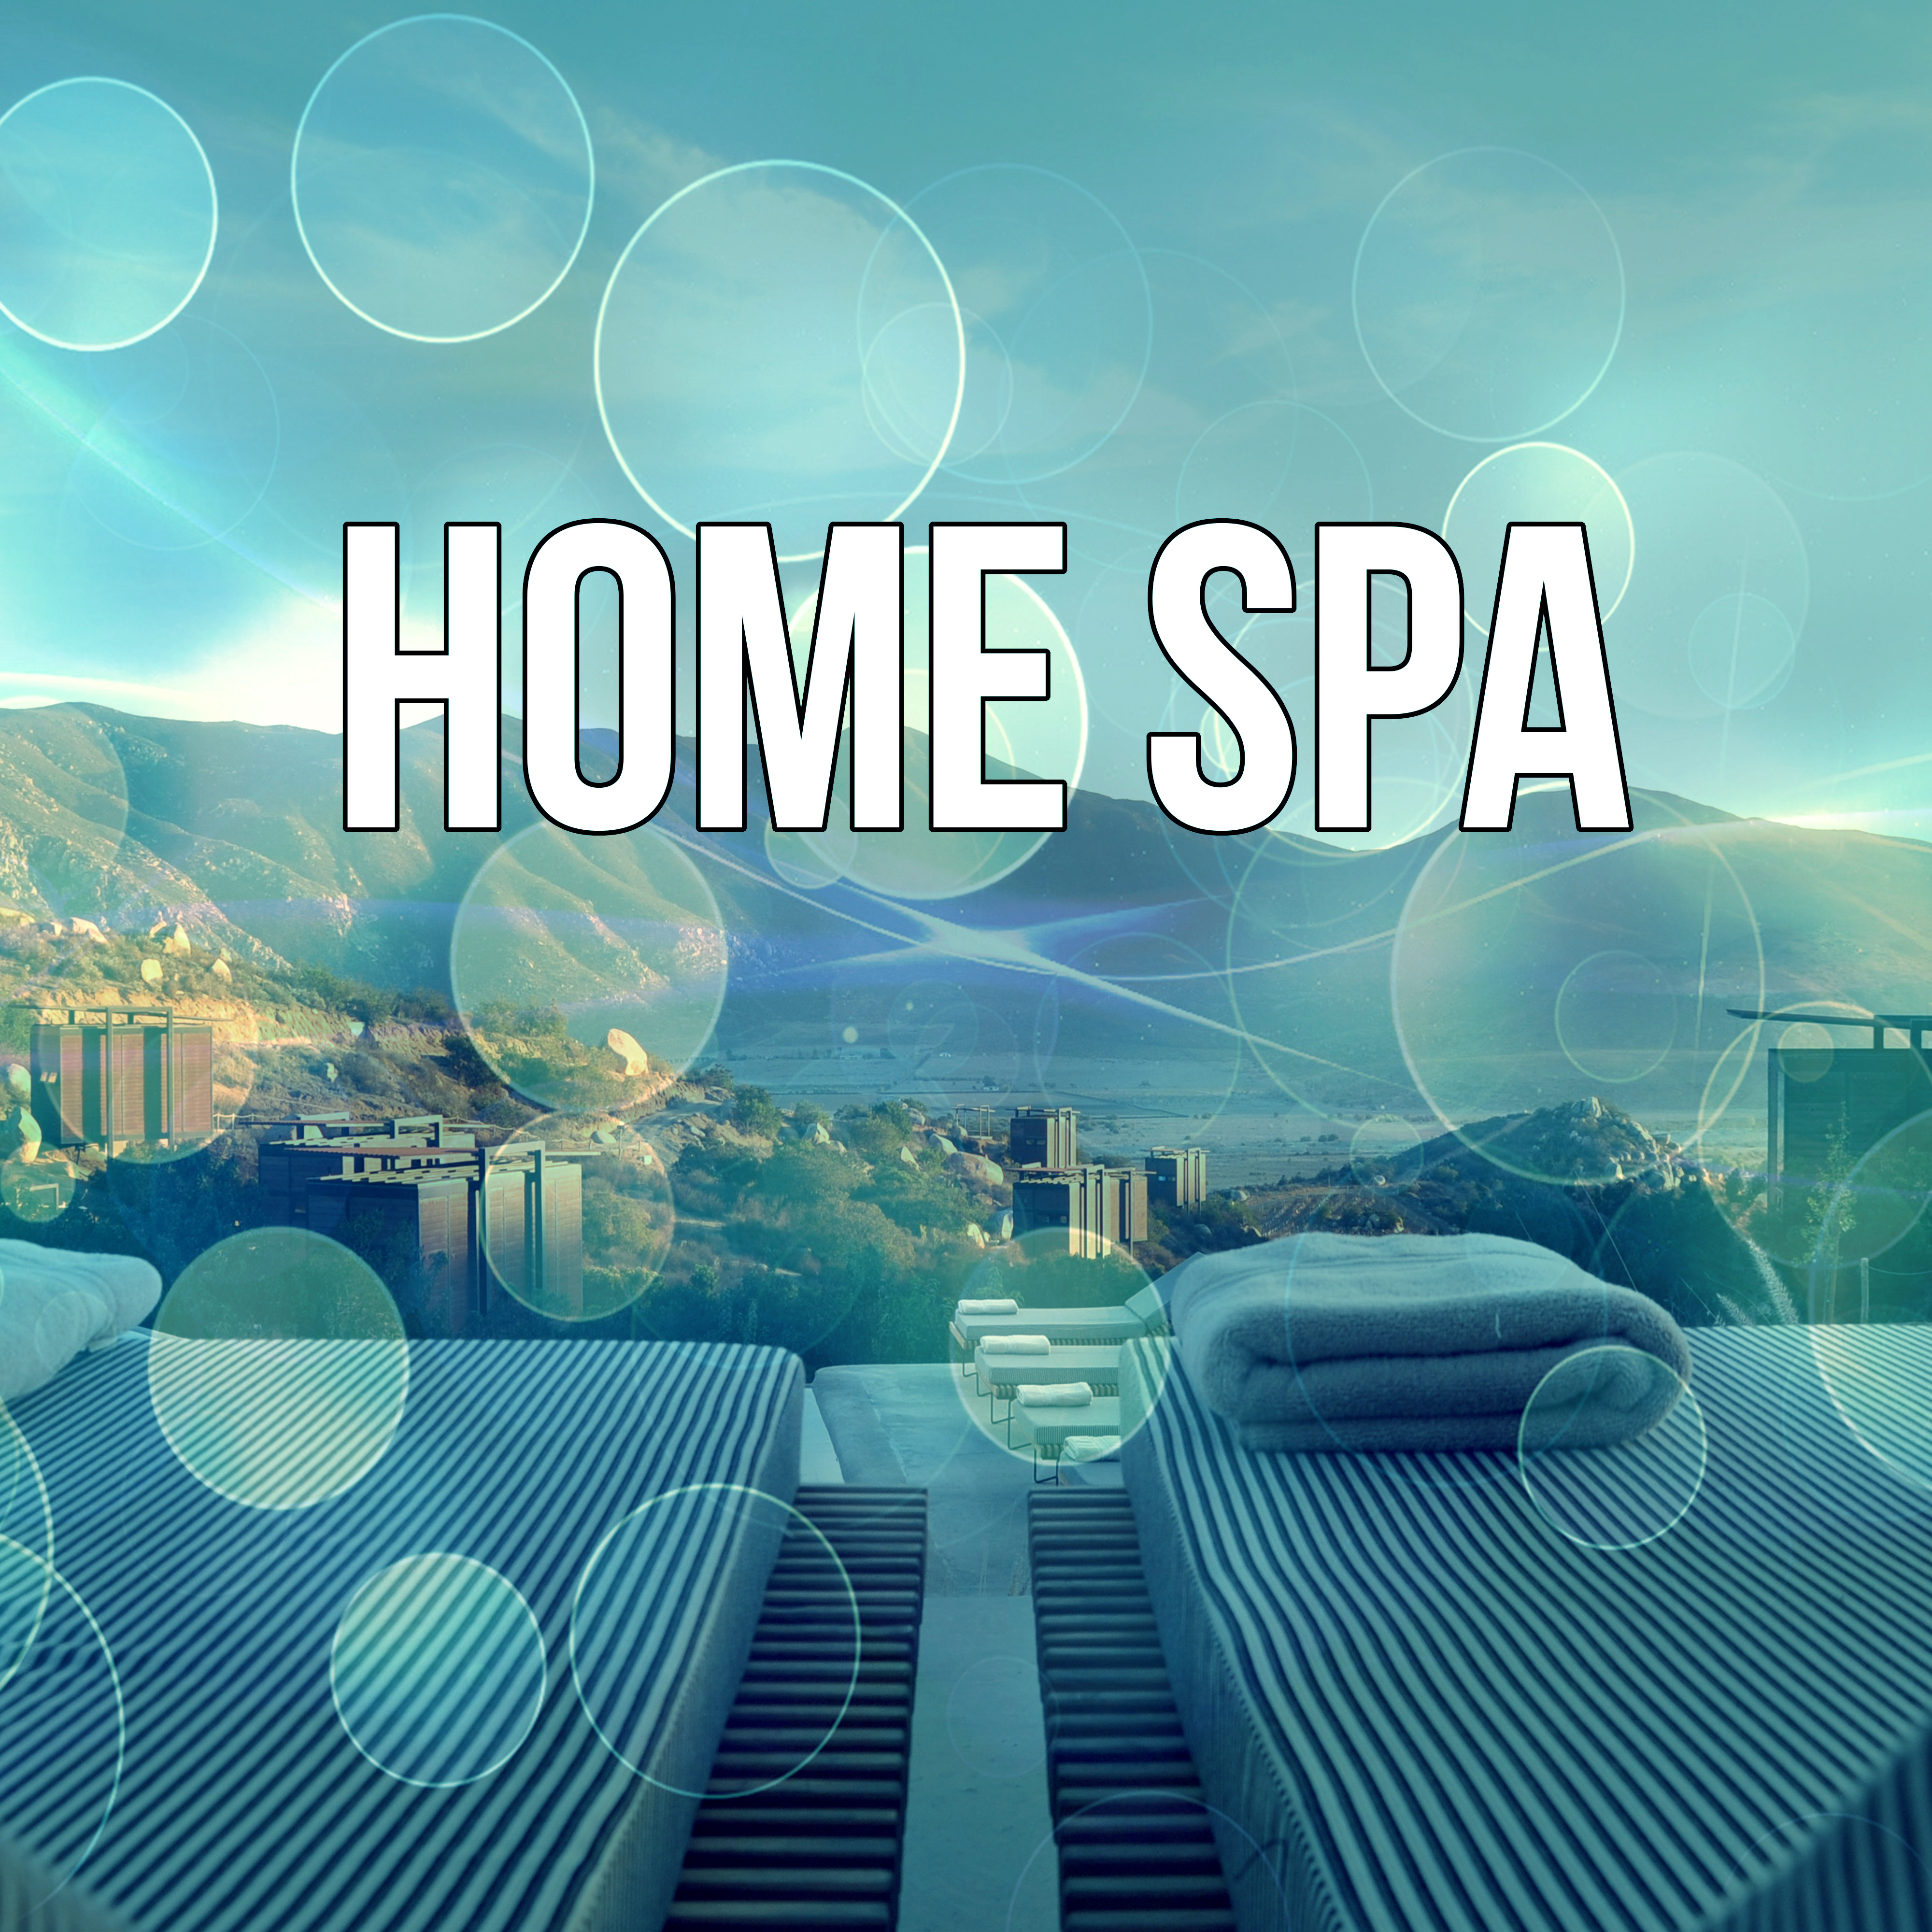 Home Spa - Nature Sounds, Well Being, Yin Yoga, Massage Therapy, Harmony, Soothing Sounds, Pacific Ocean Waves